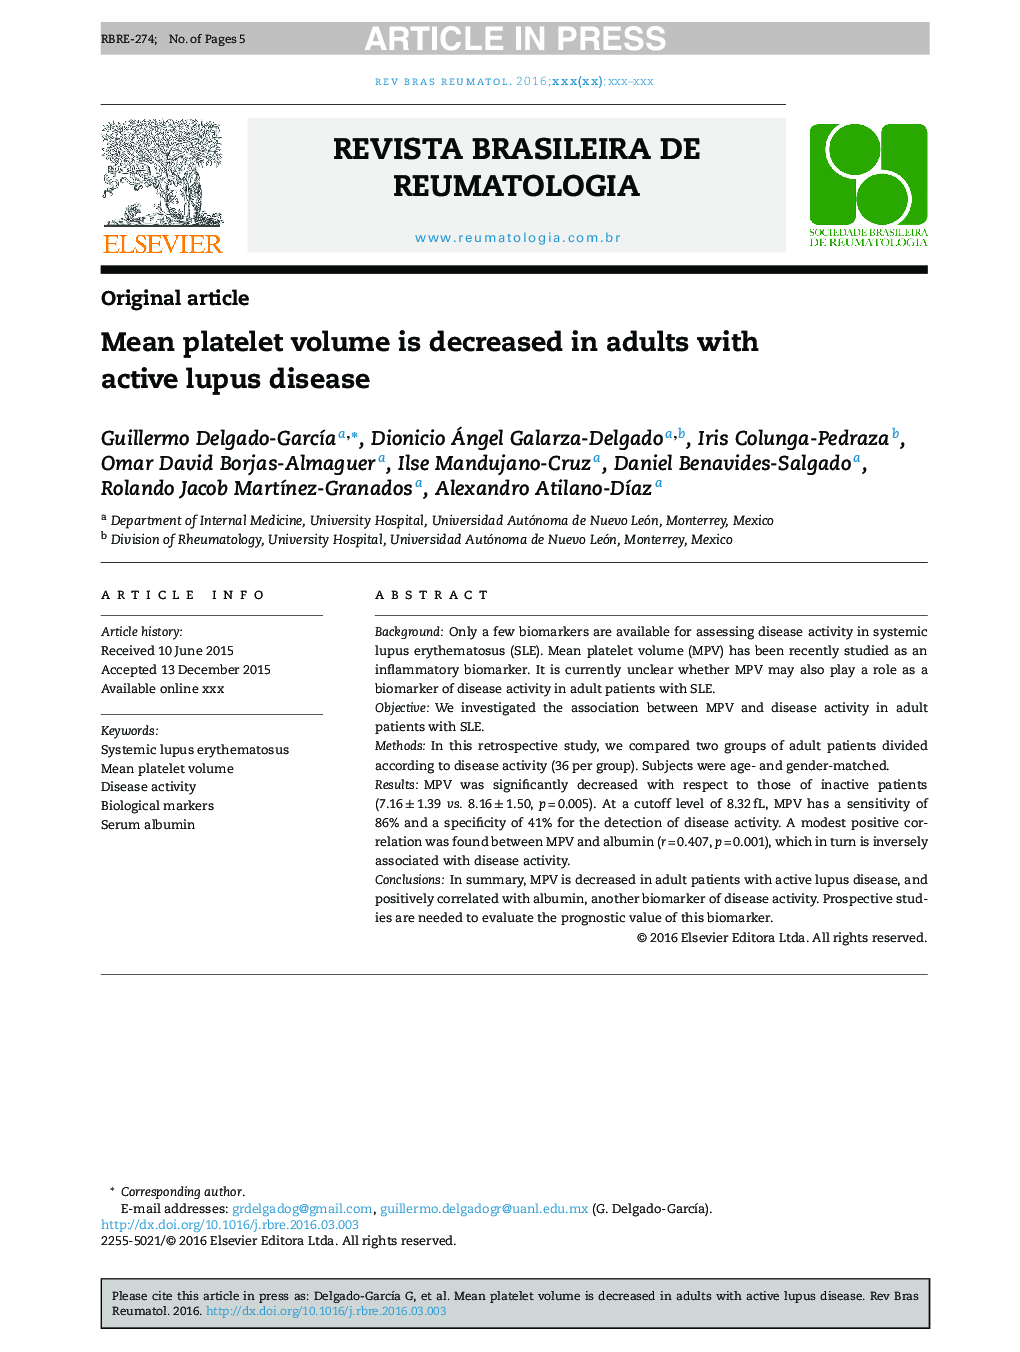 Mean platelet volume is decreased in adults with active lupus disease